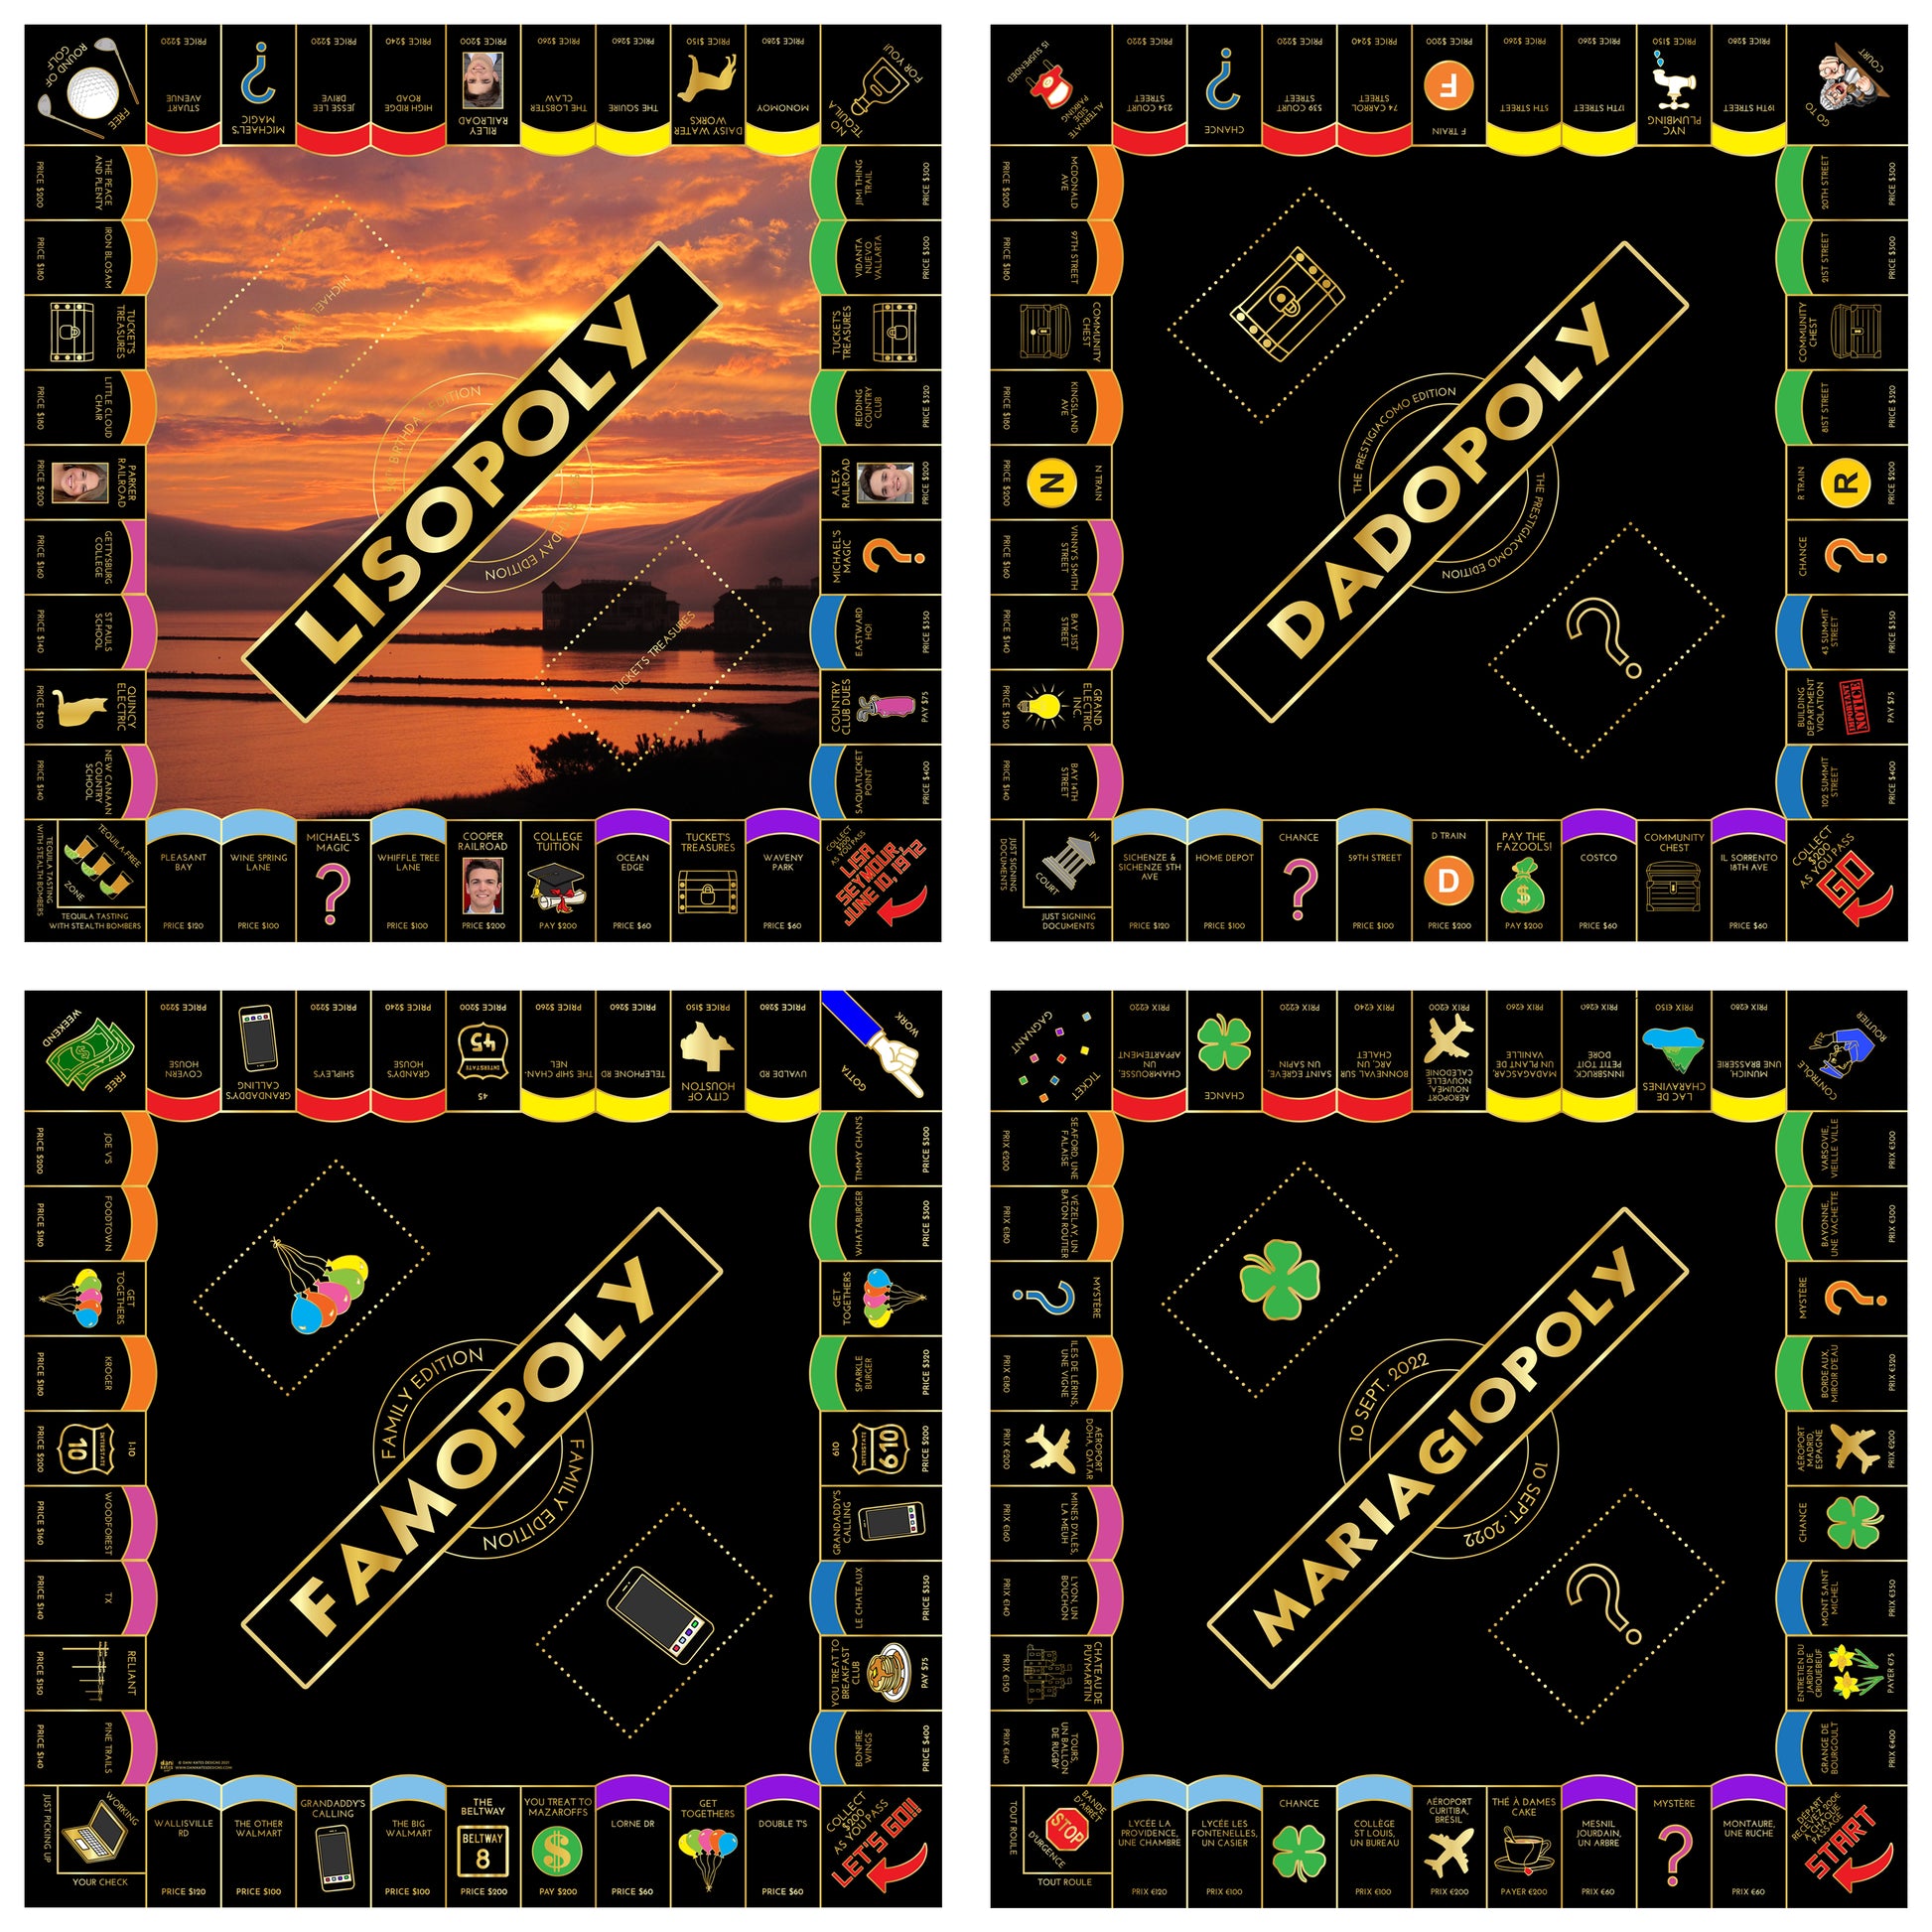 Black and Gold custom made board game. Make your very own board game with Custom Monopoly personalized board games. The perfect and unique birthday gift.